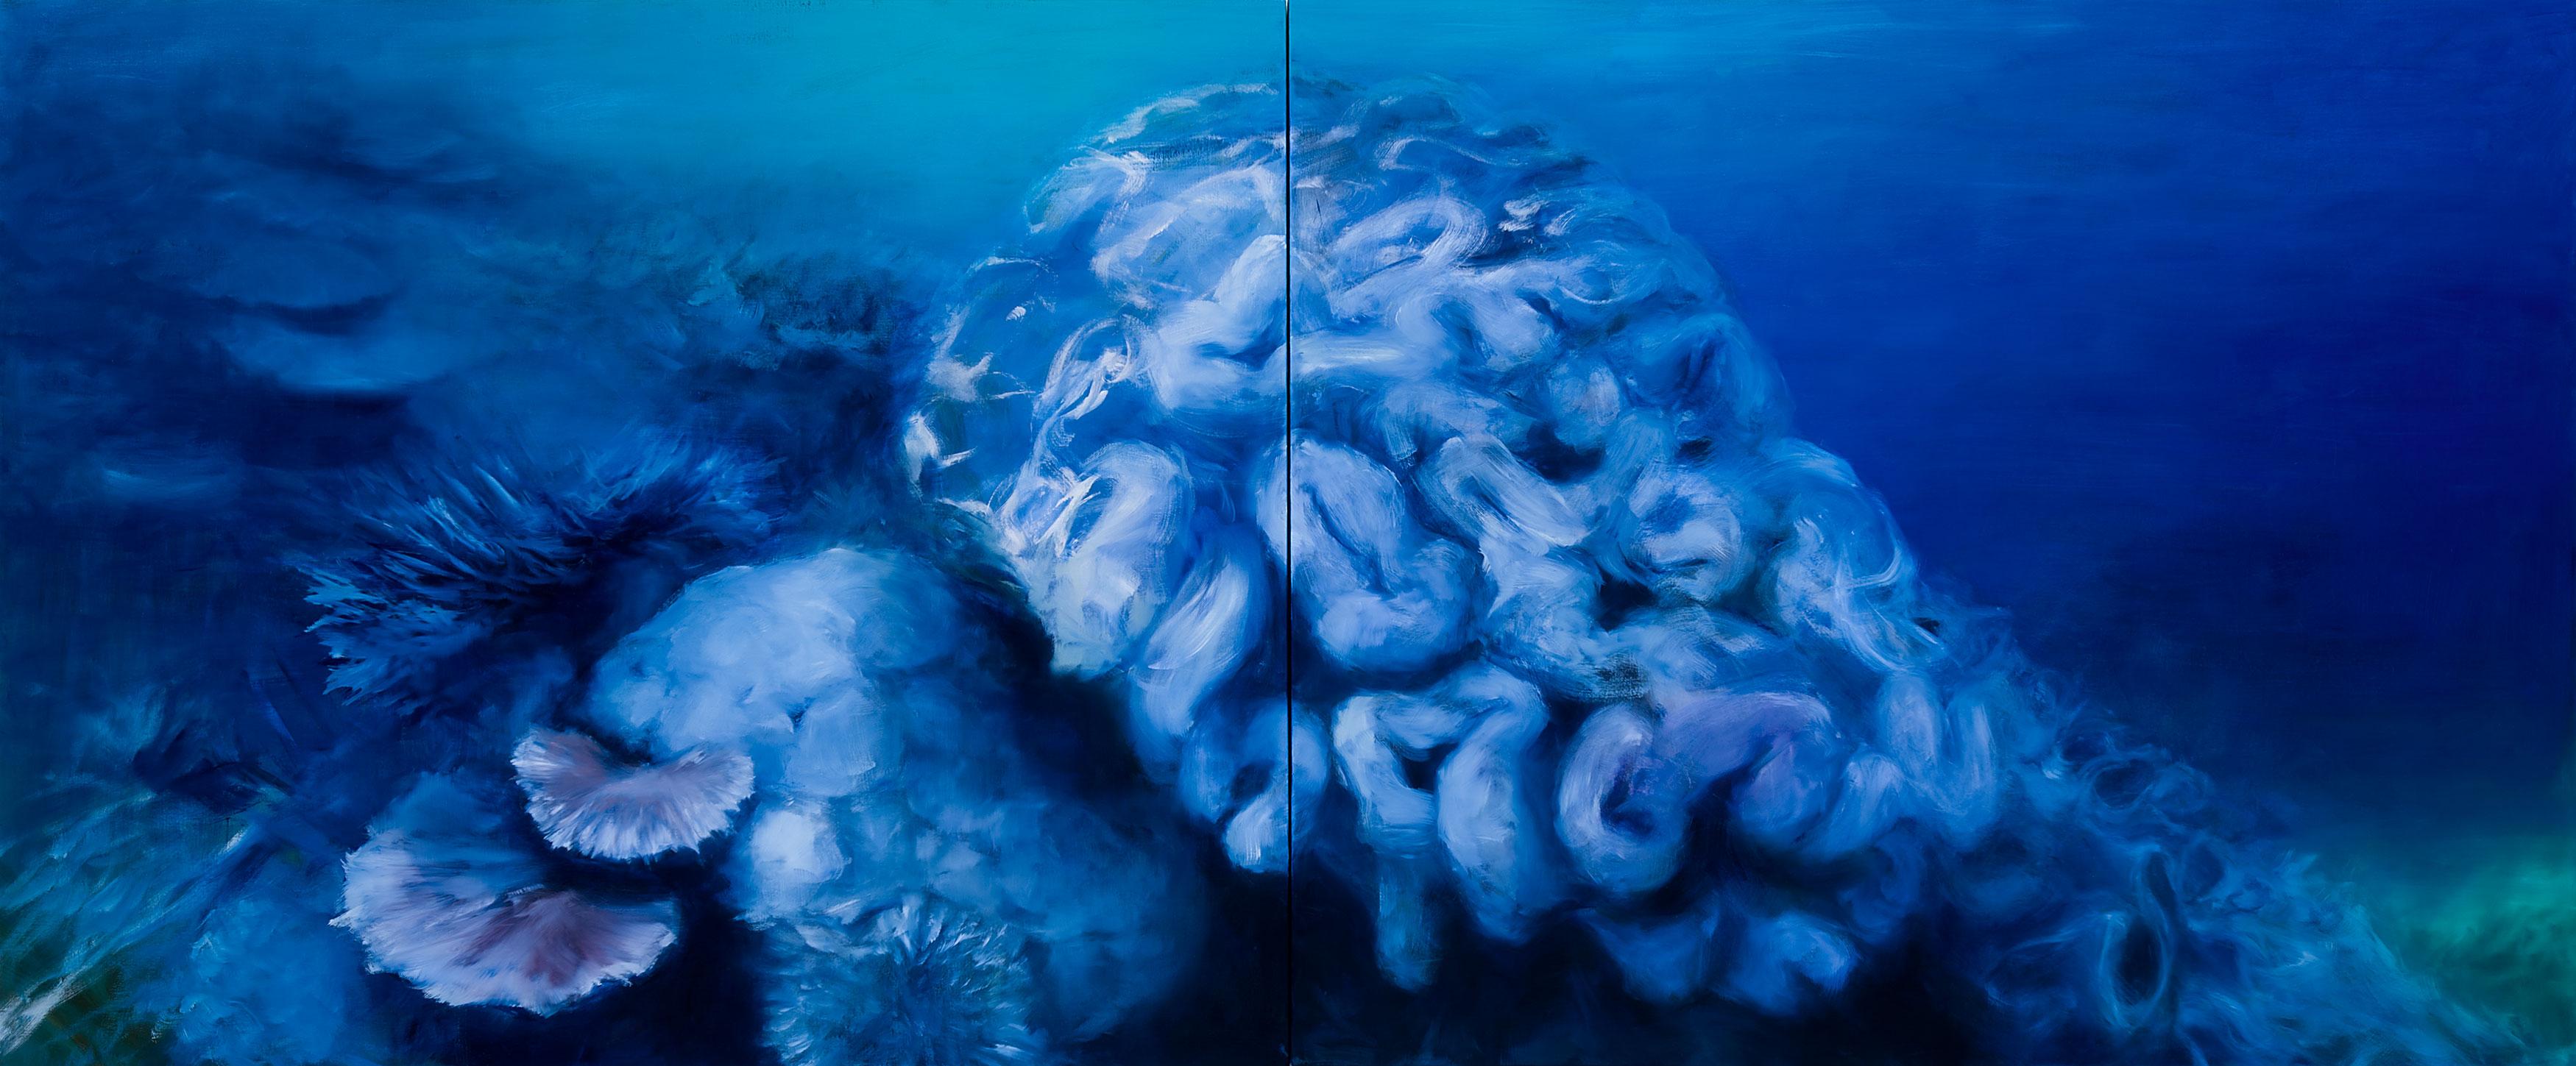 Karen Marston Figurative Painting - "Ebbing Reef" Corals, Large Scale Contemporary Seascape Oil Painting (deep blue)